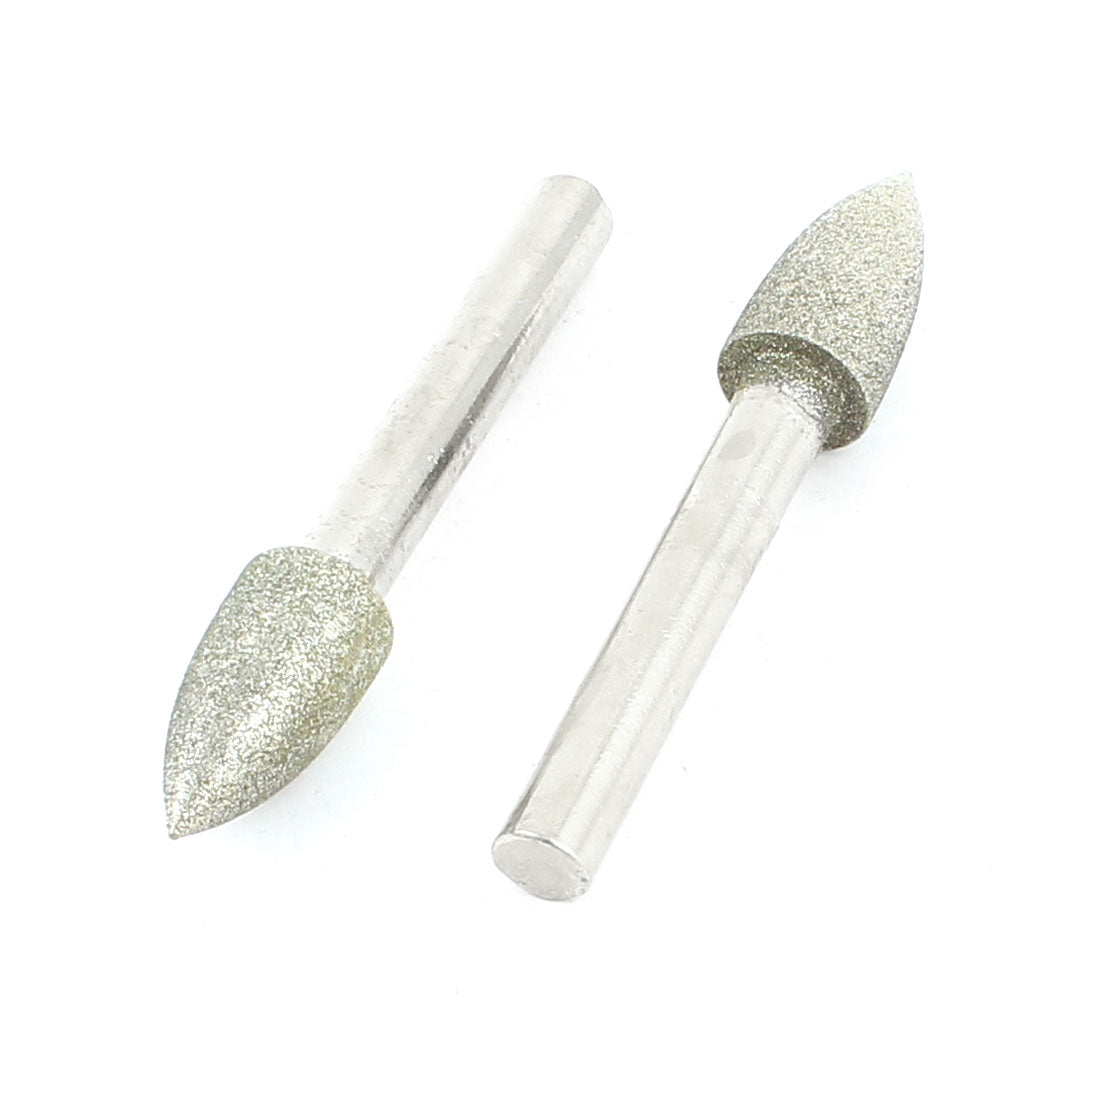 uxcell Uxcell 6mm x 10mm Tapered Head Buffing Bits Diamond Mounted Point 2 Pcs